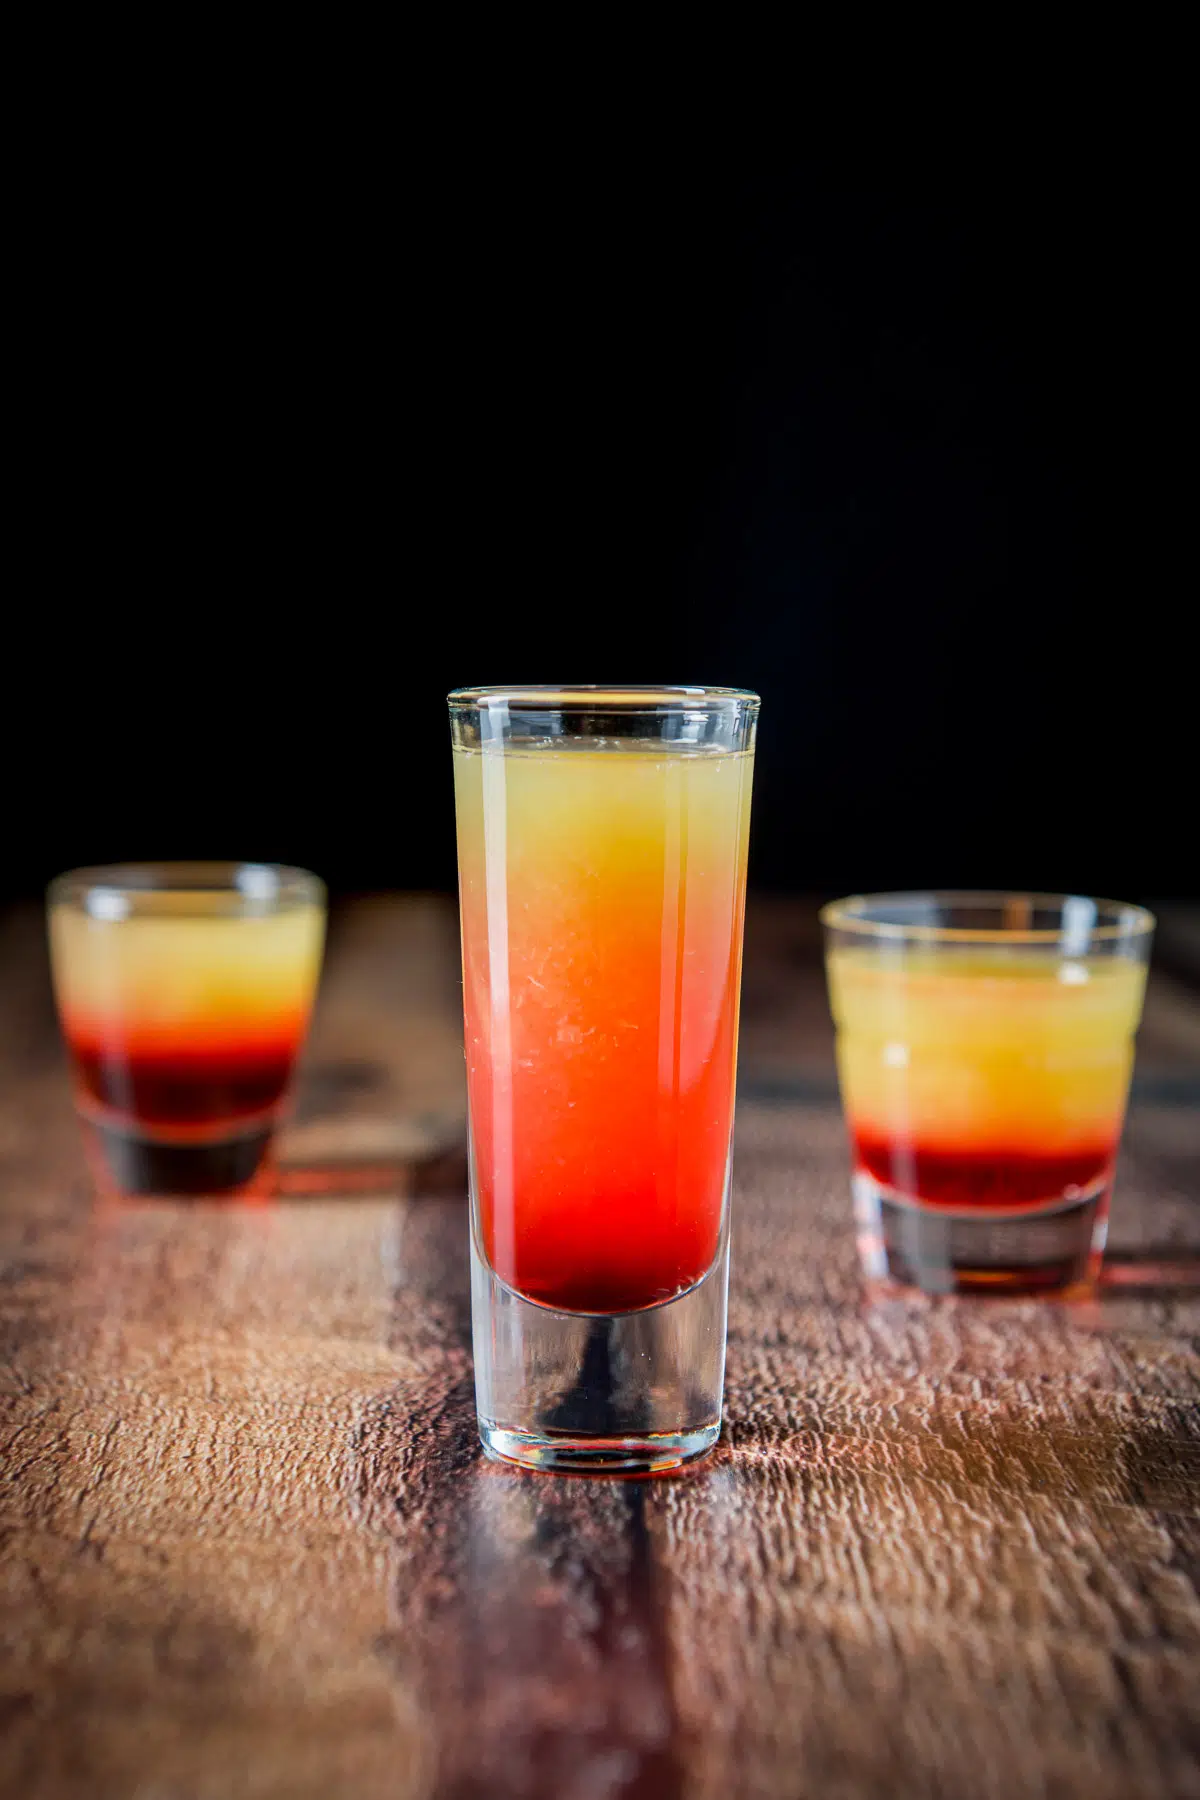 Vertical view of the tequila sunrise shot in the three glasses